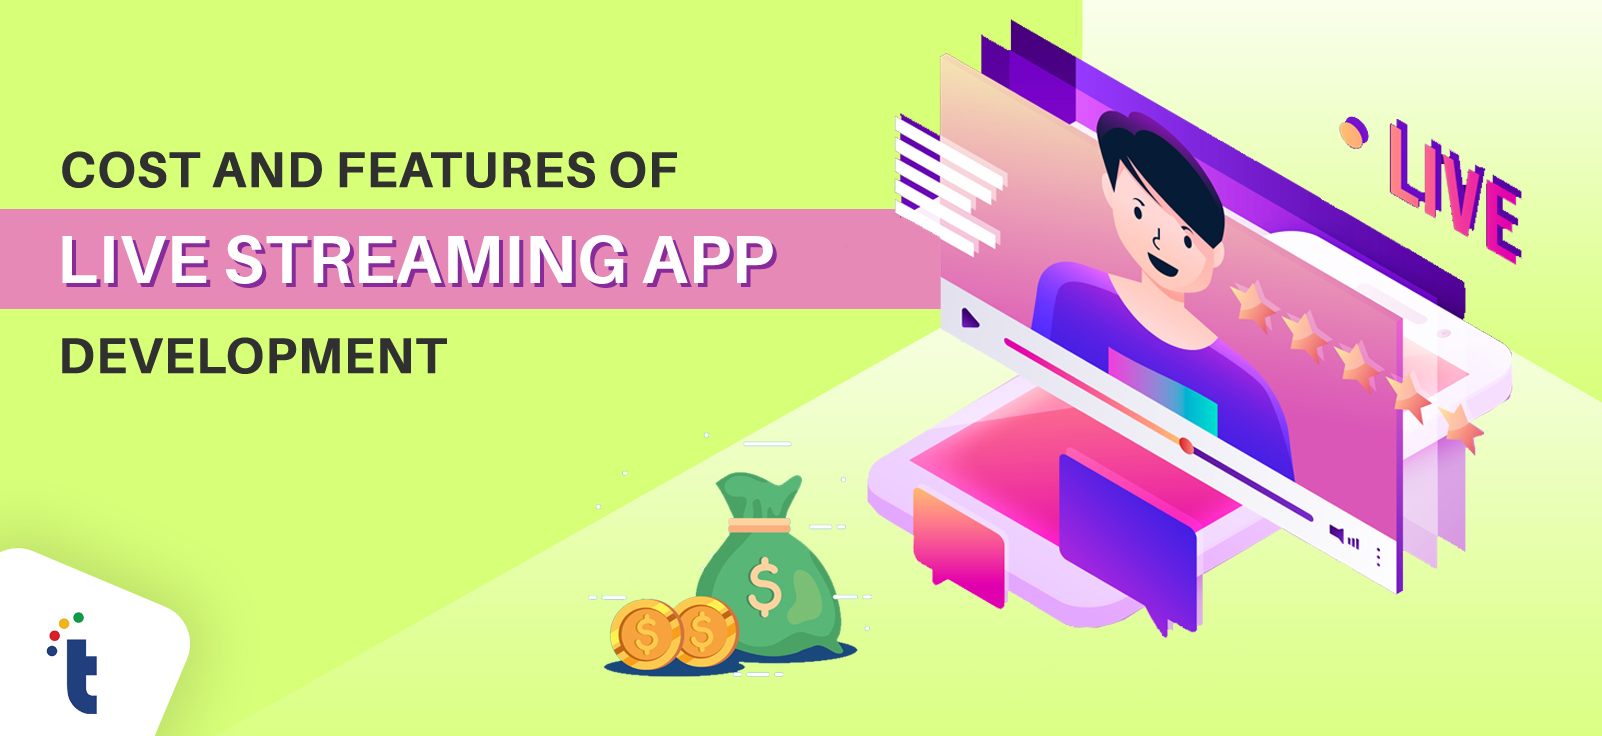 Live Streaming App: Video Streaming App Development Cost & Features